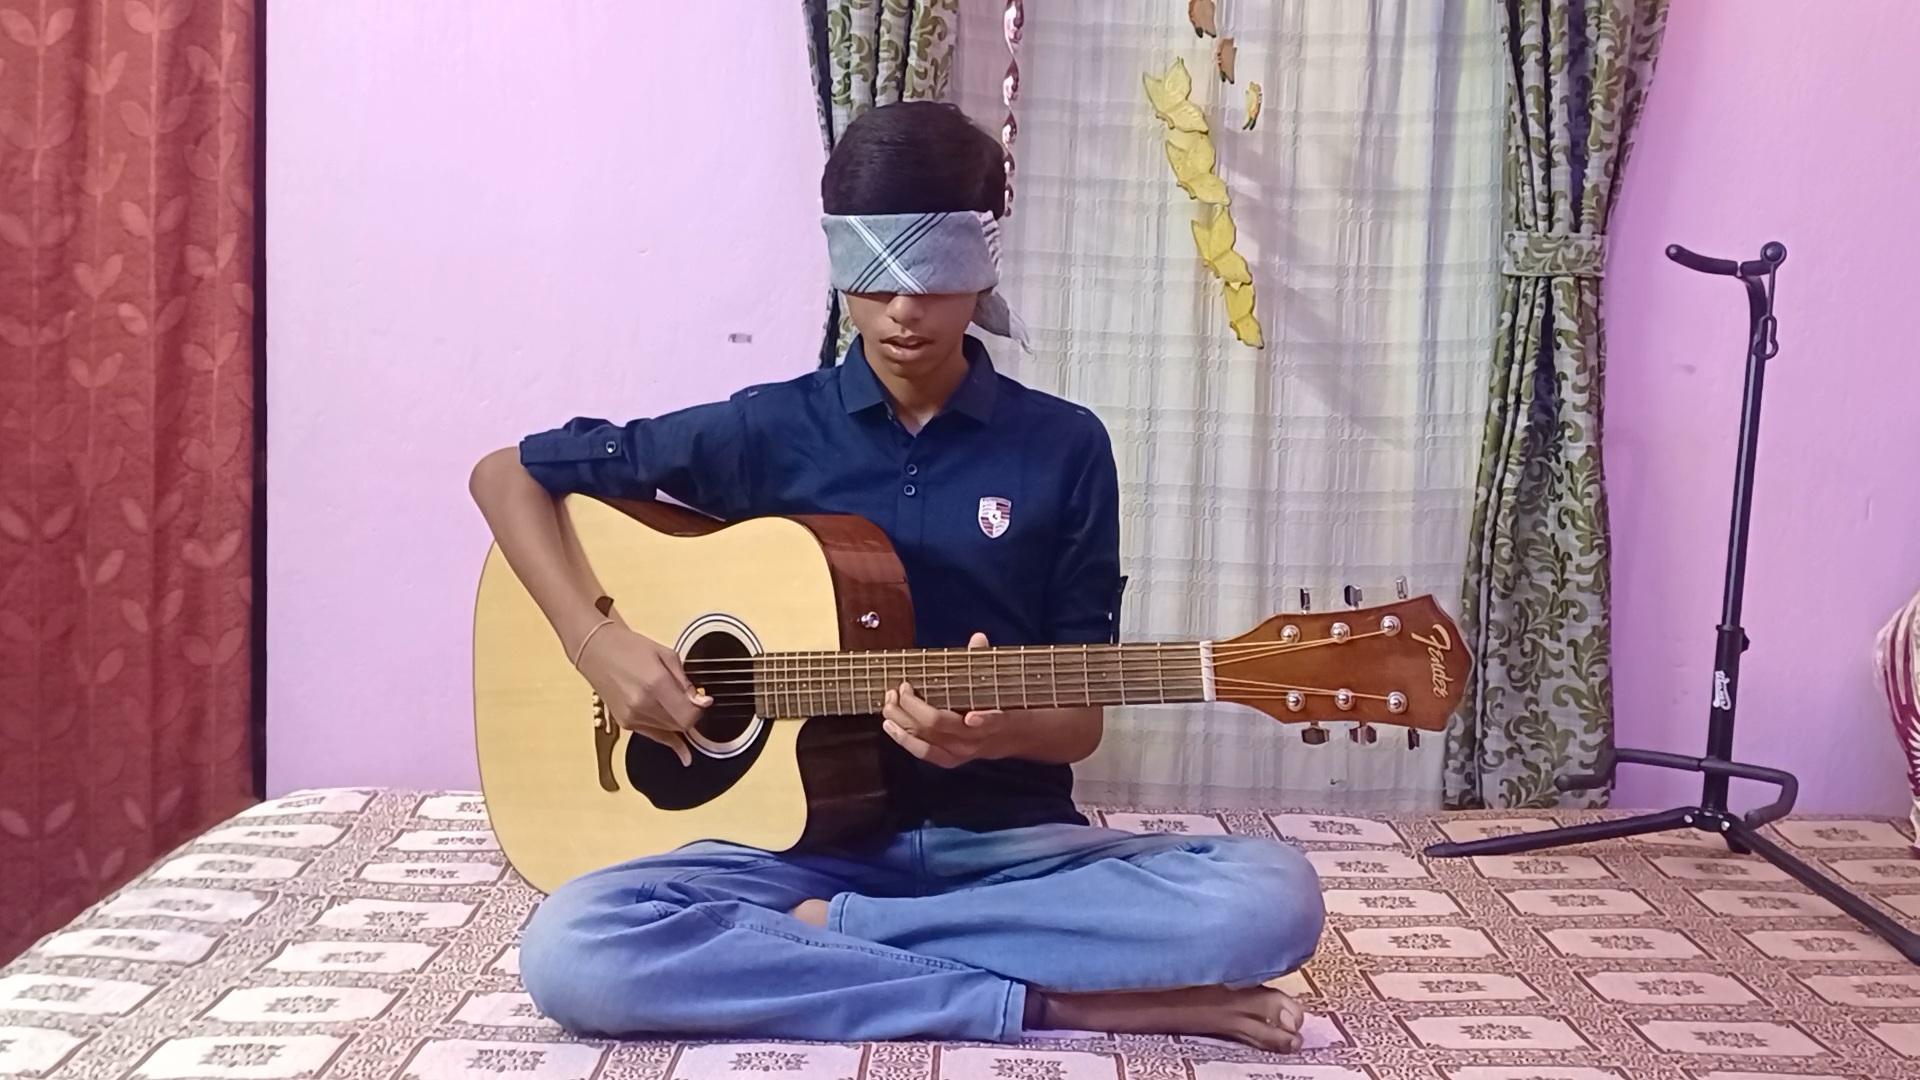 teenager-playing-guitar-blindfolded-in-west-bengal-enters-asia-book-of-records